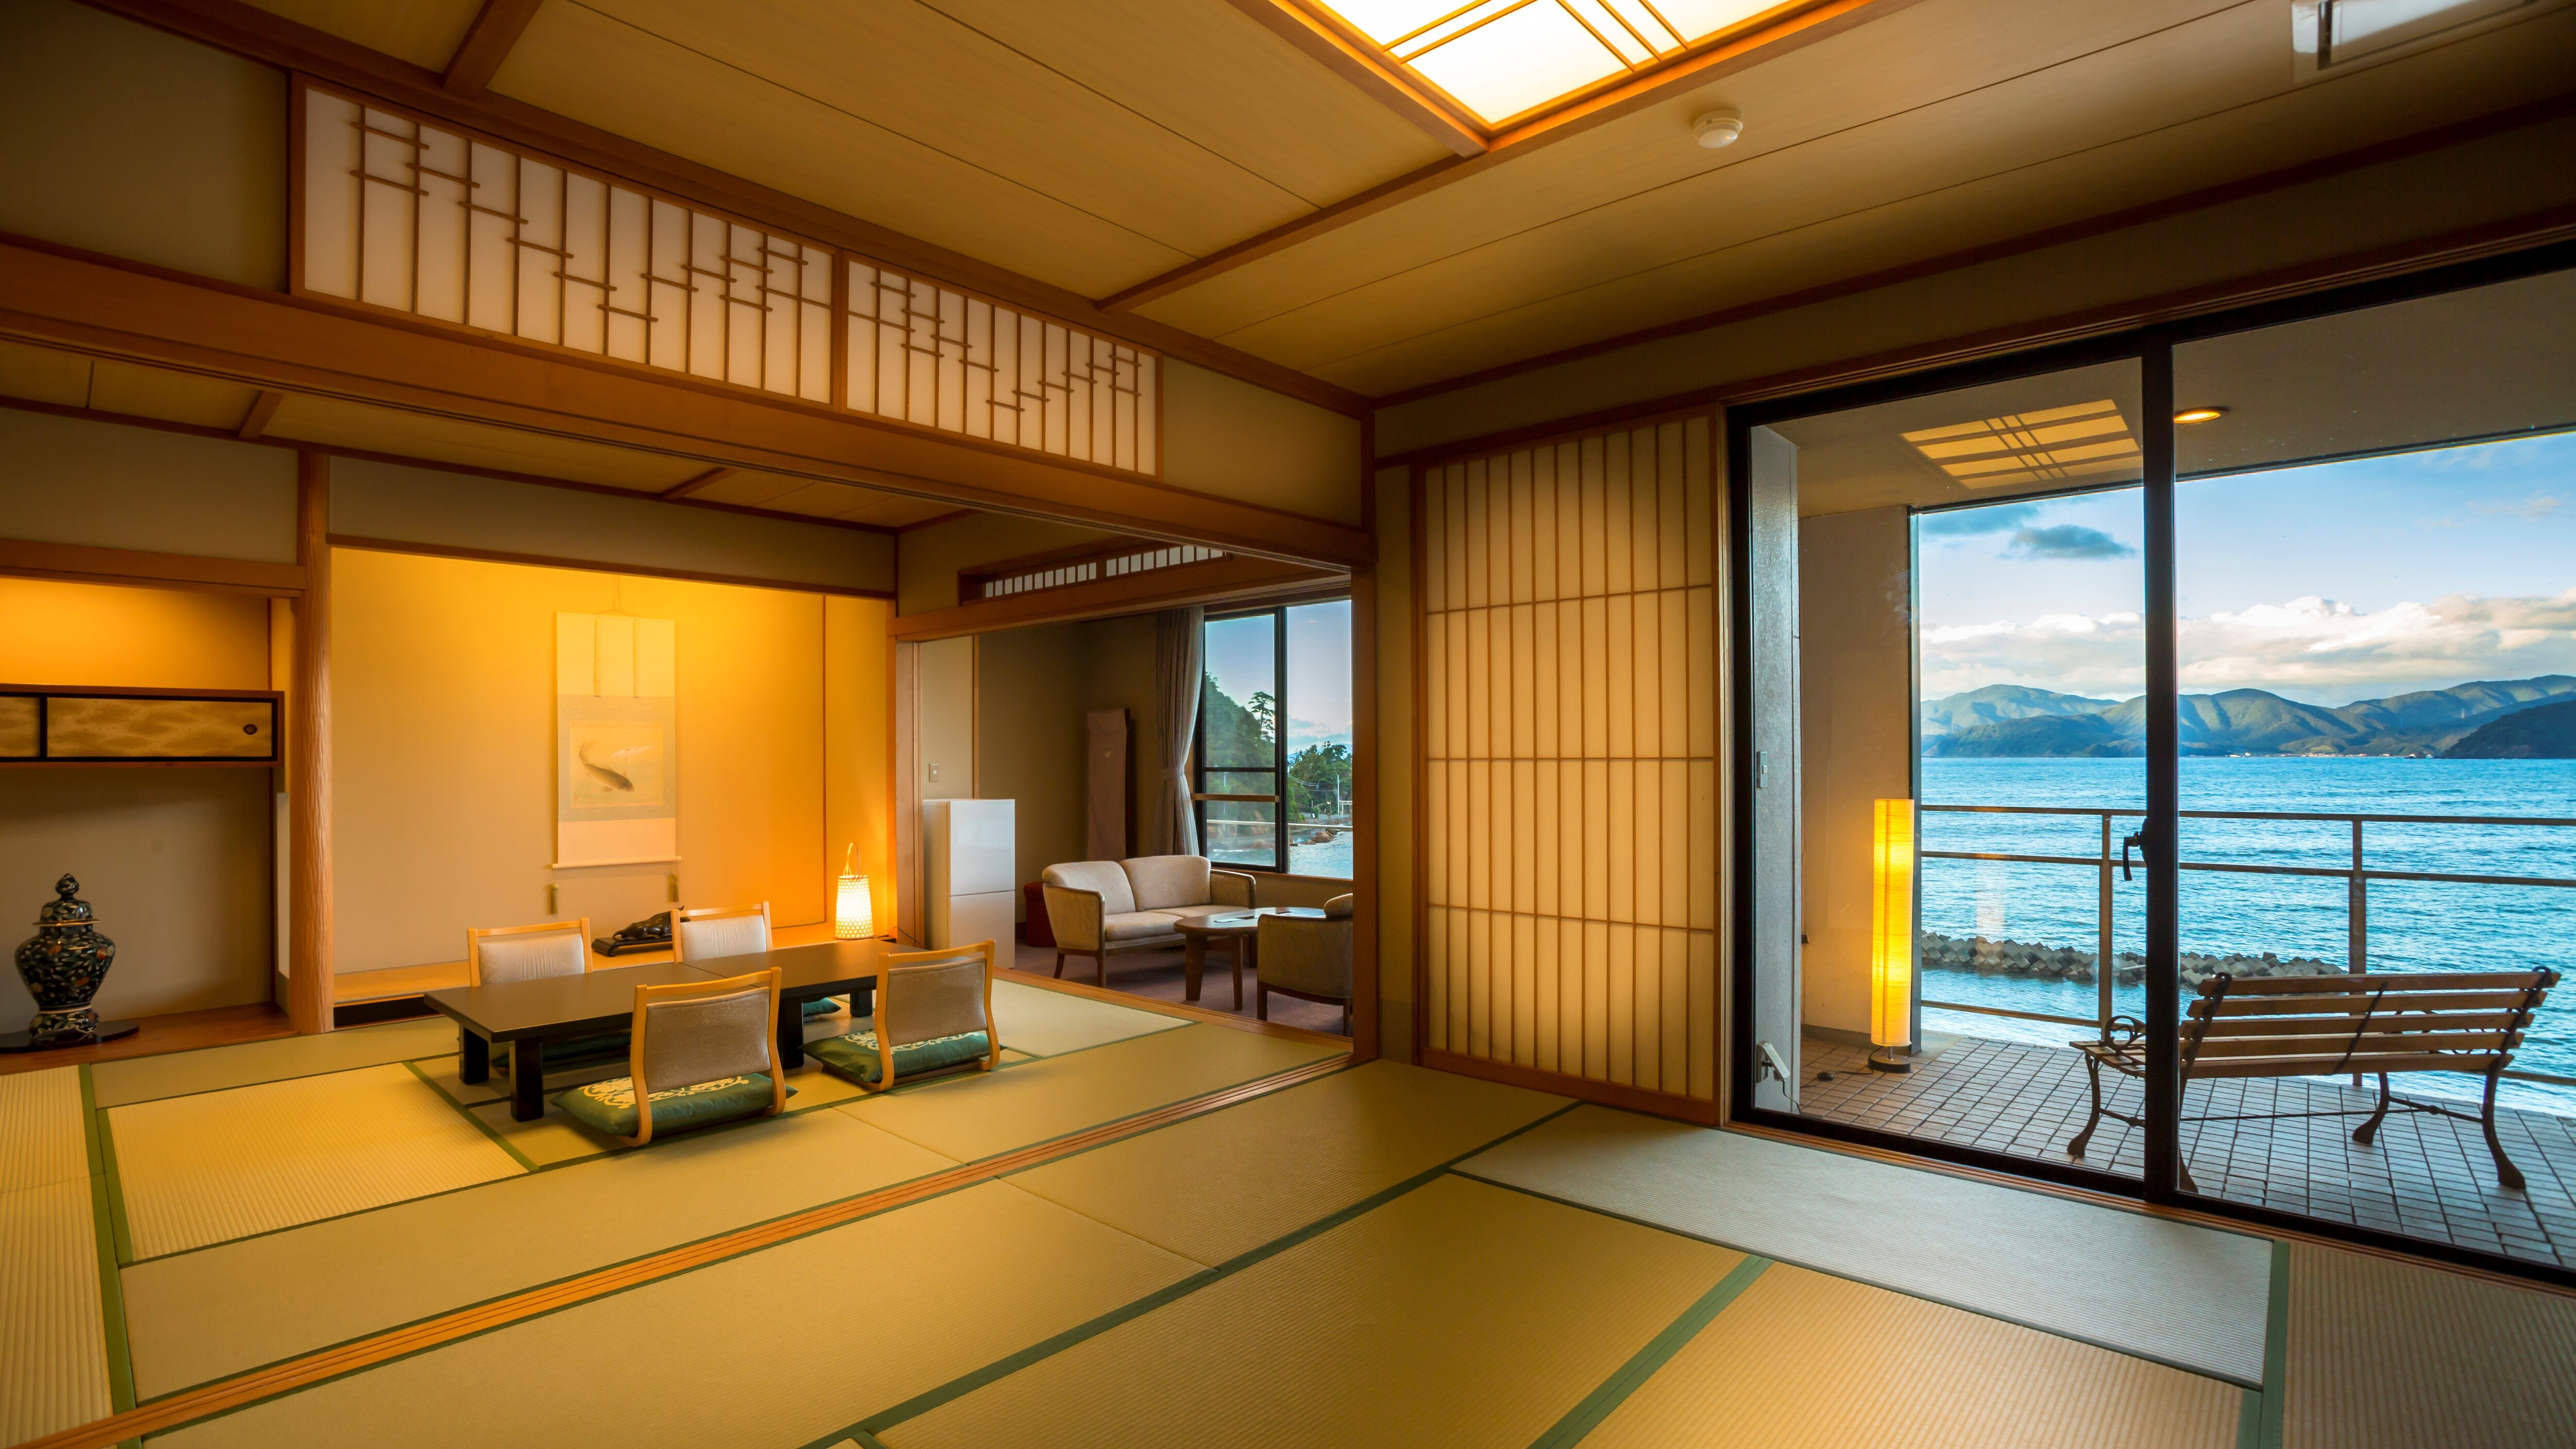 ≪Special room≫ Japanese-style room 10 tatami mats + 10 tatami mats + 3 tatami mats